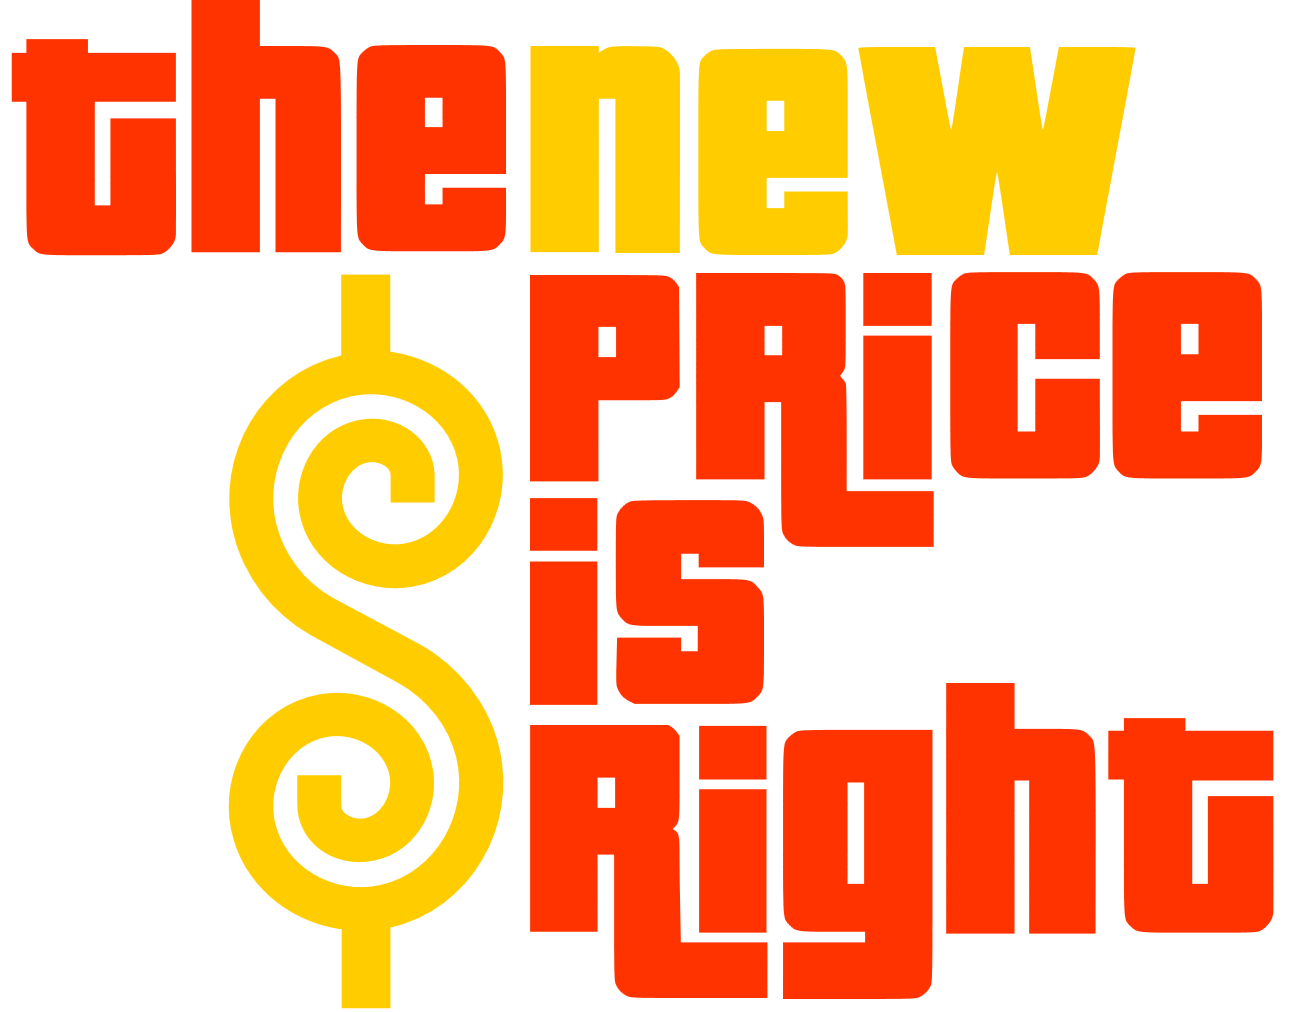 Right Logo - The Price is Right | Logopedia | FANDOM powered by Wikia